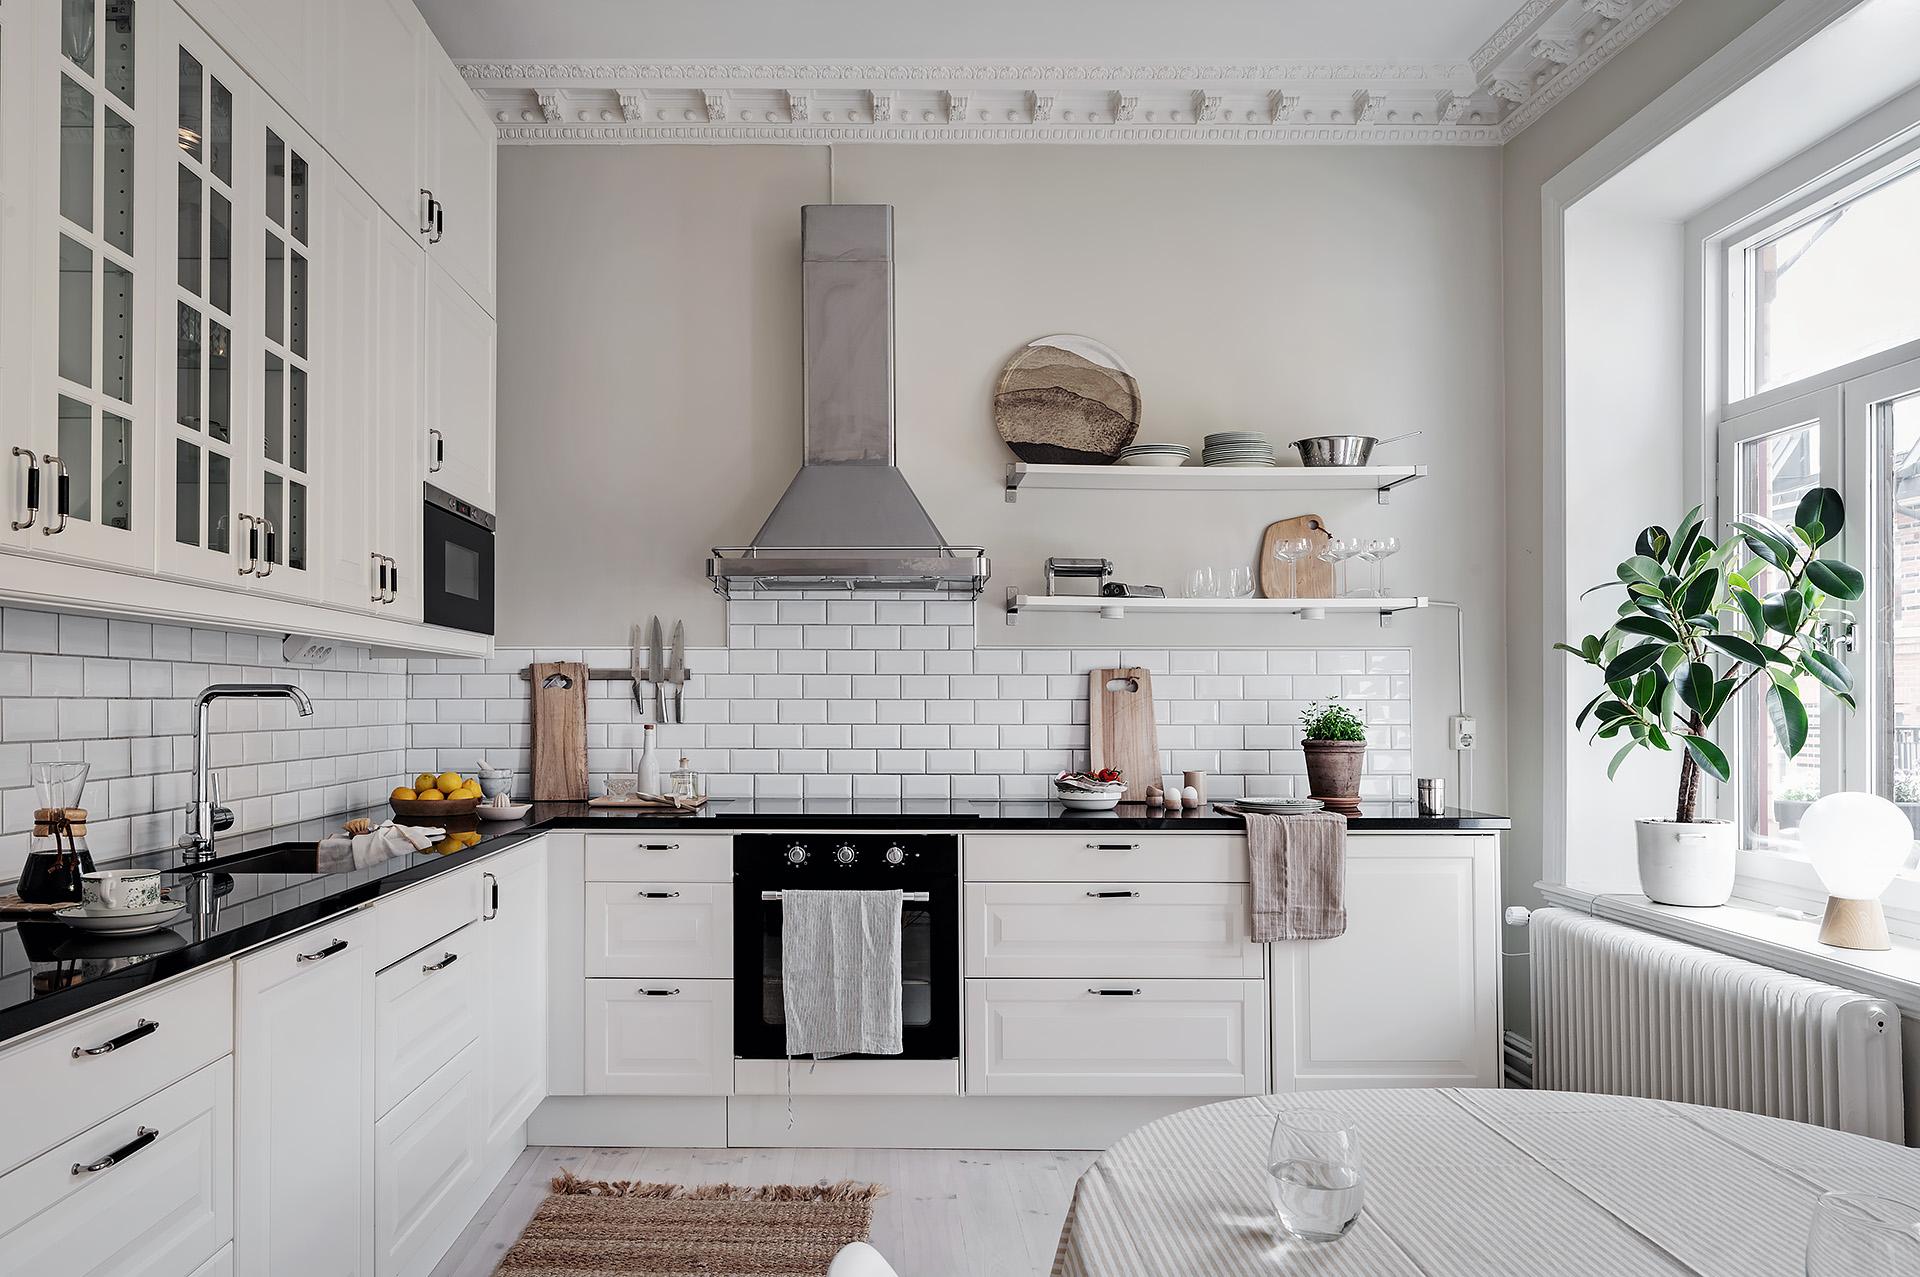 30 Ideas for White Kitchen Cabinets With Black Hardware